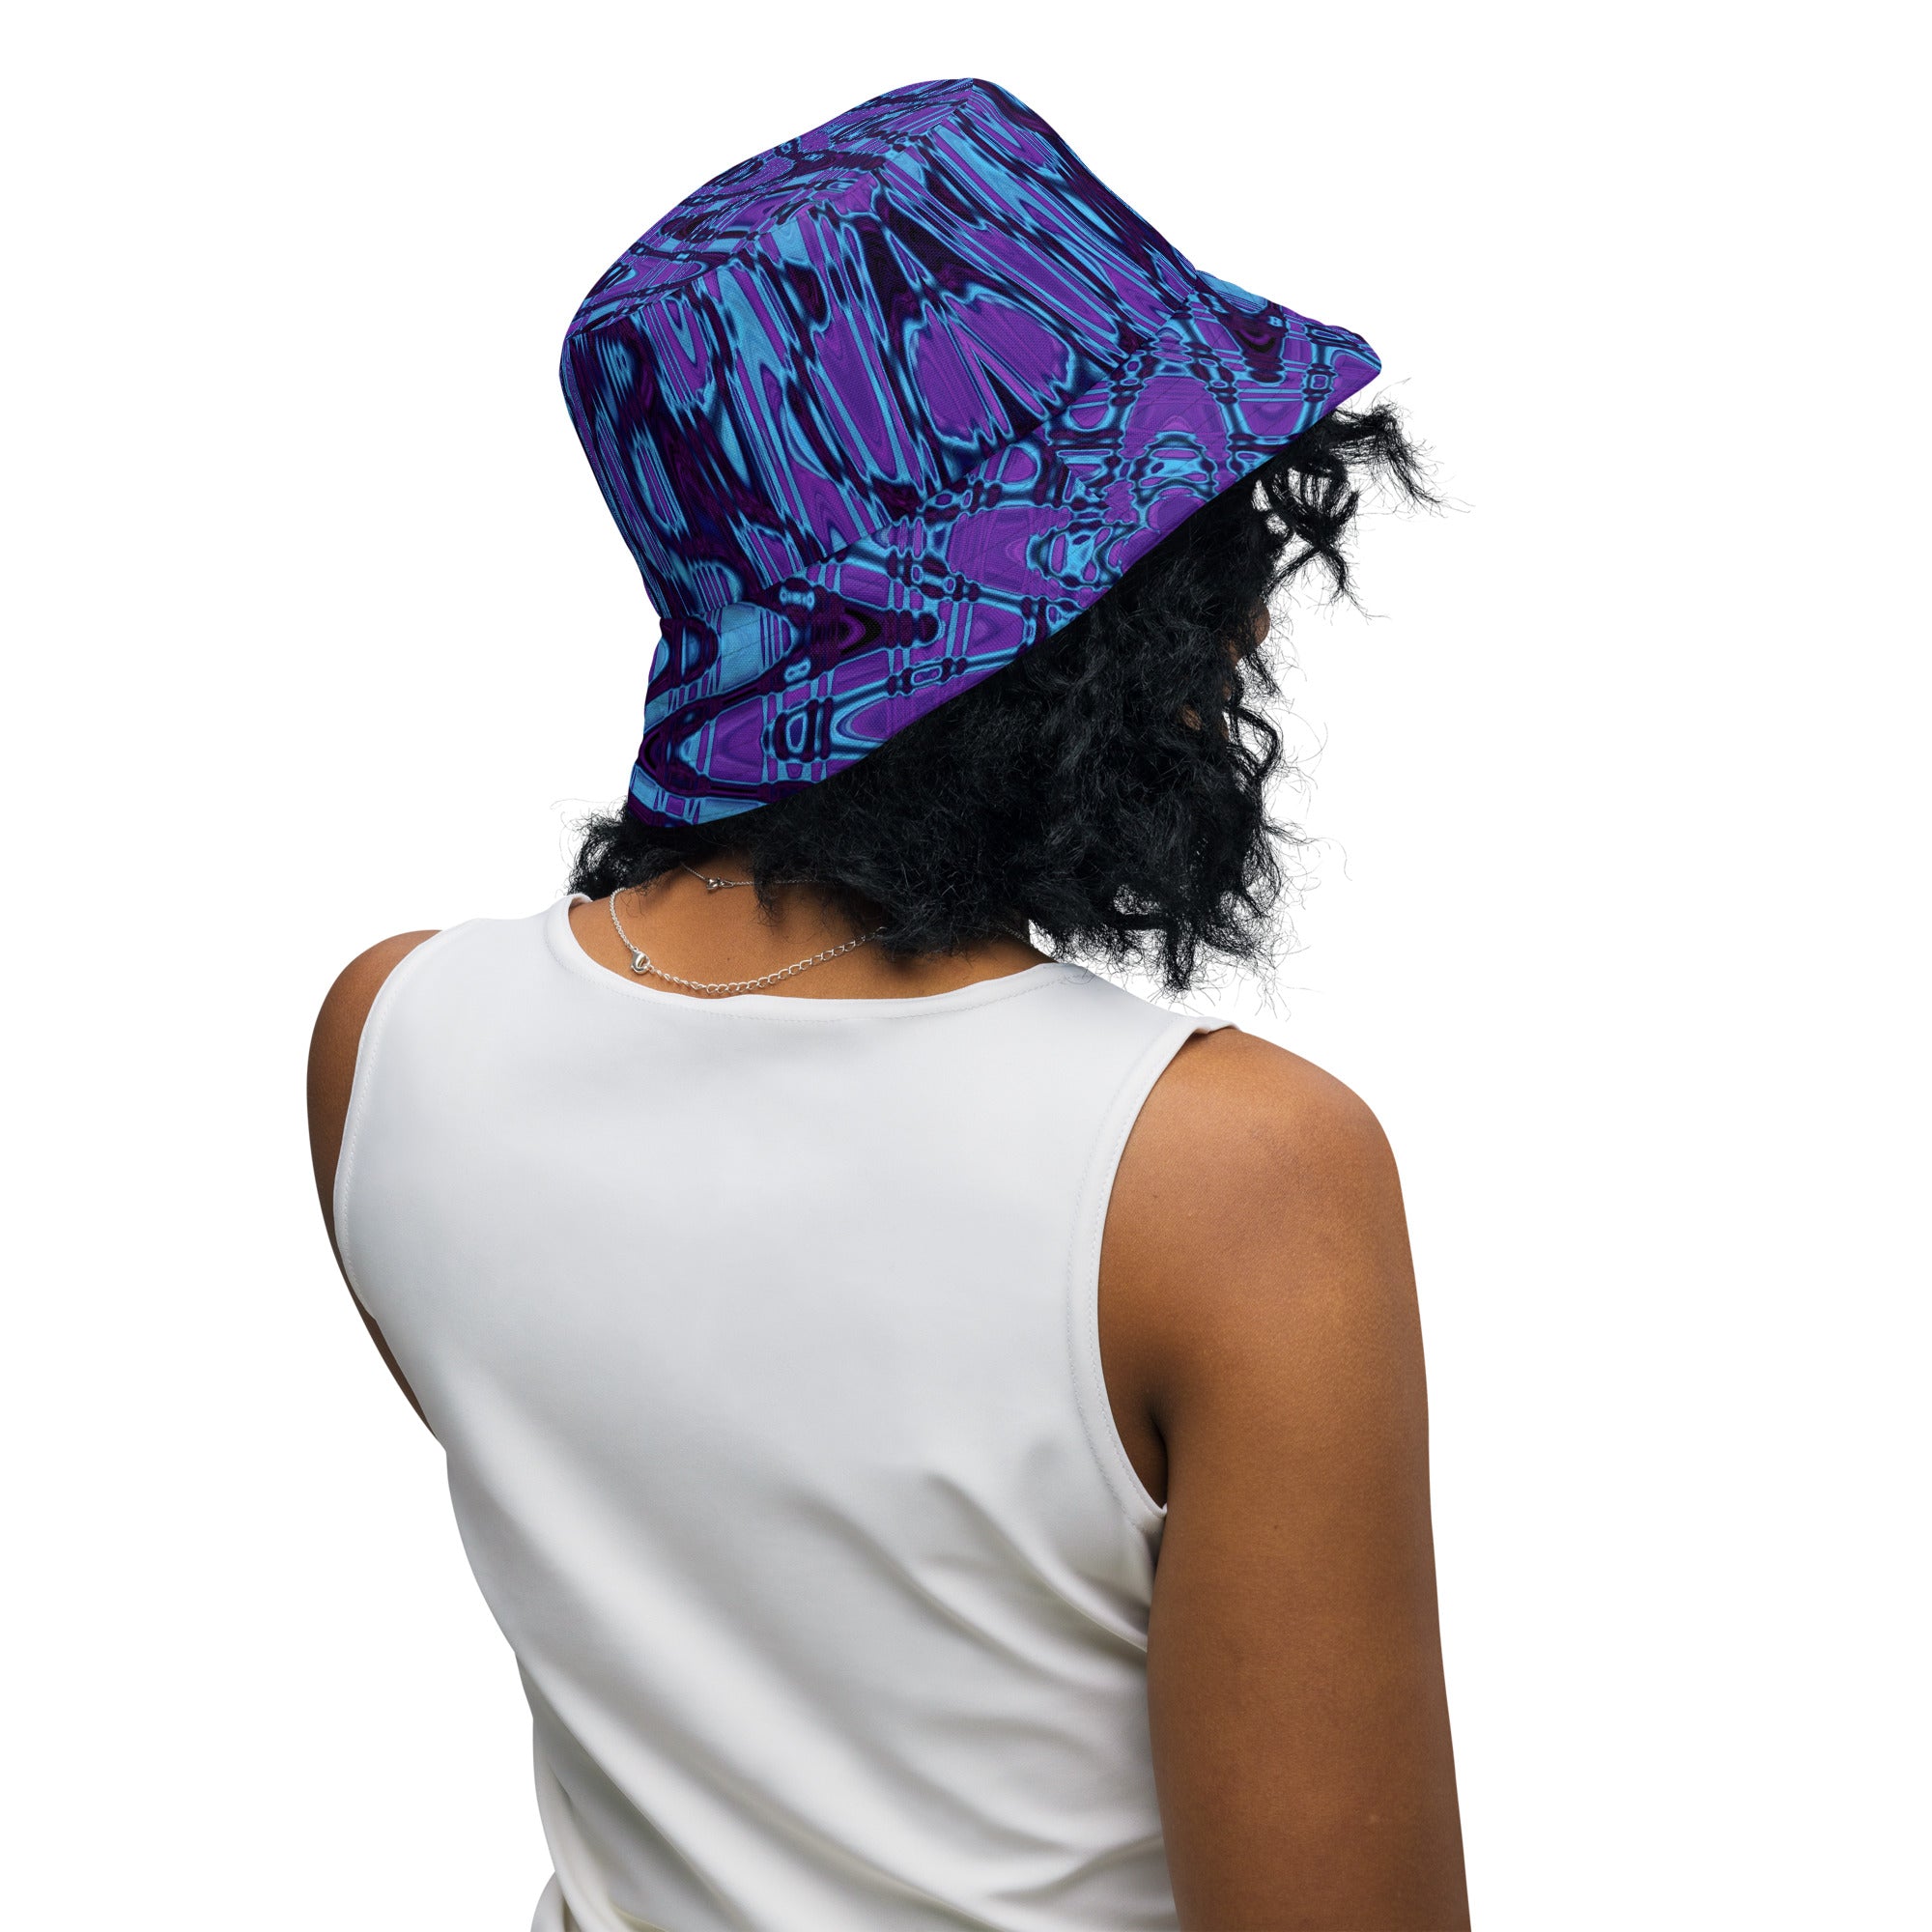 Reversible Bucket Hat | Cool Purple and Blue Abstract Tie Dye Retro Waves